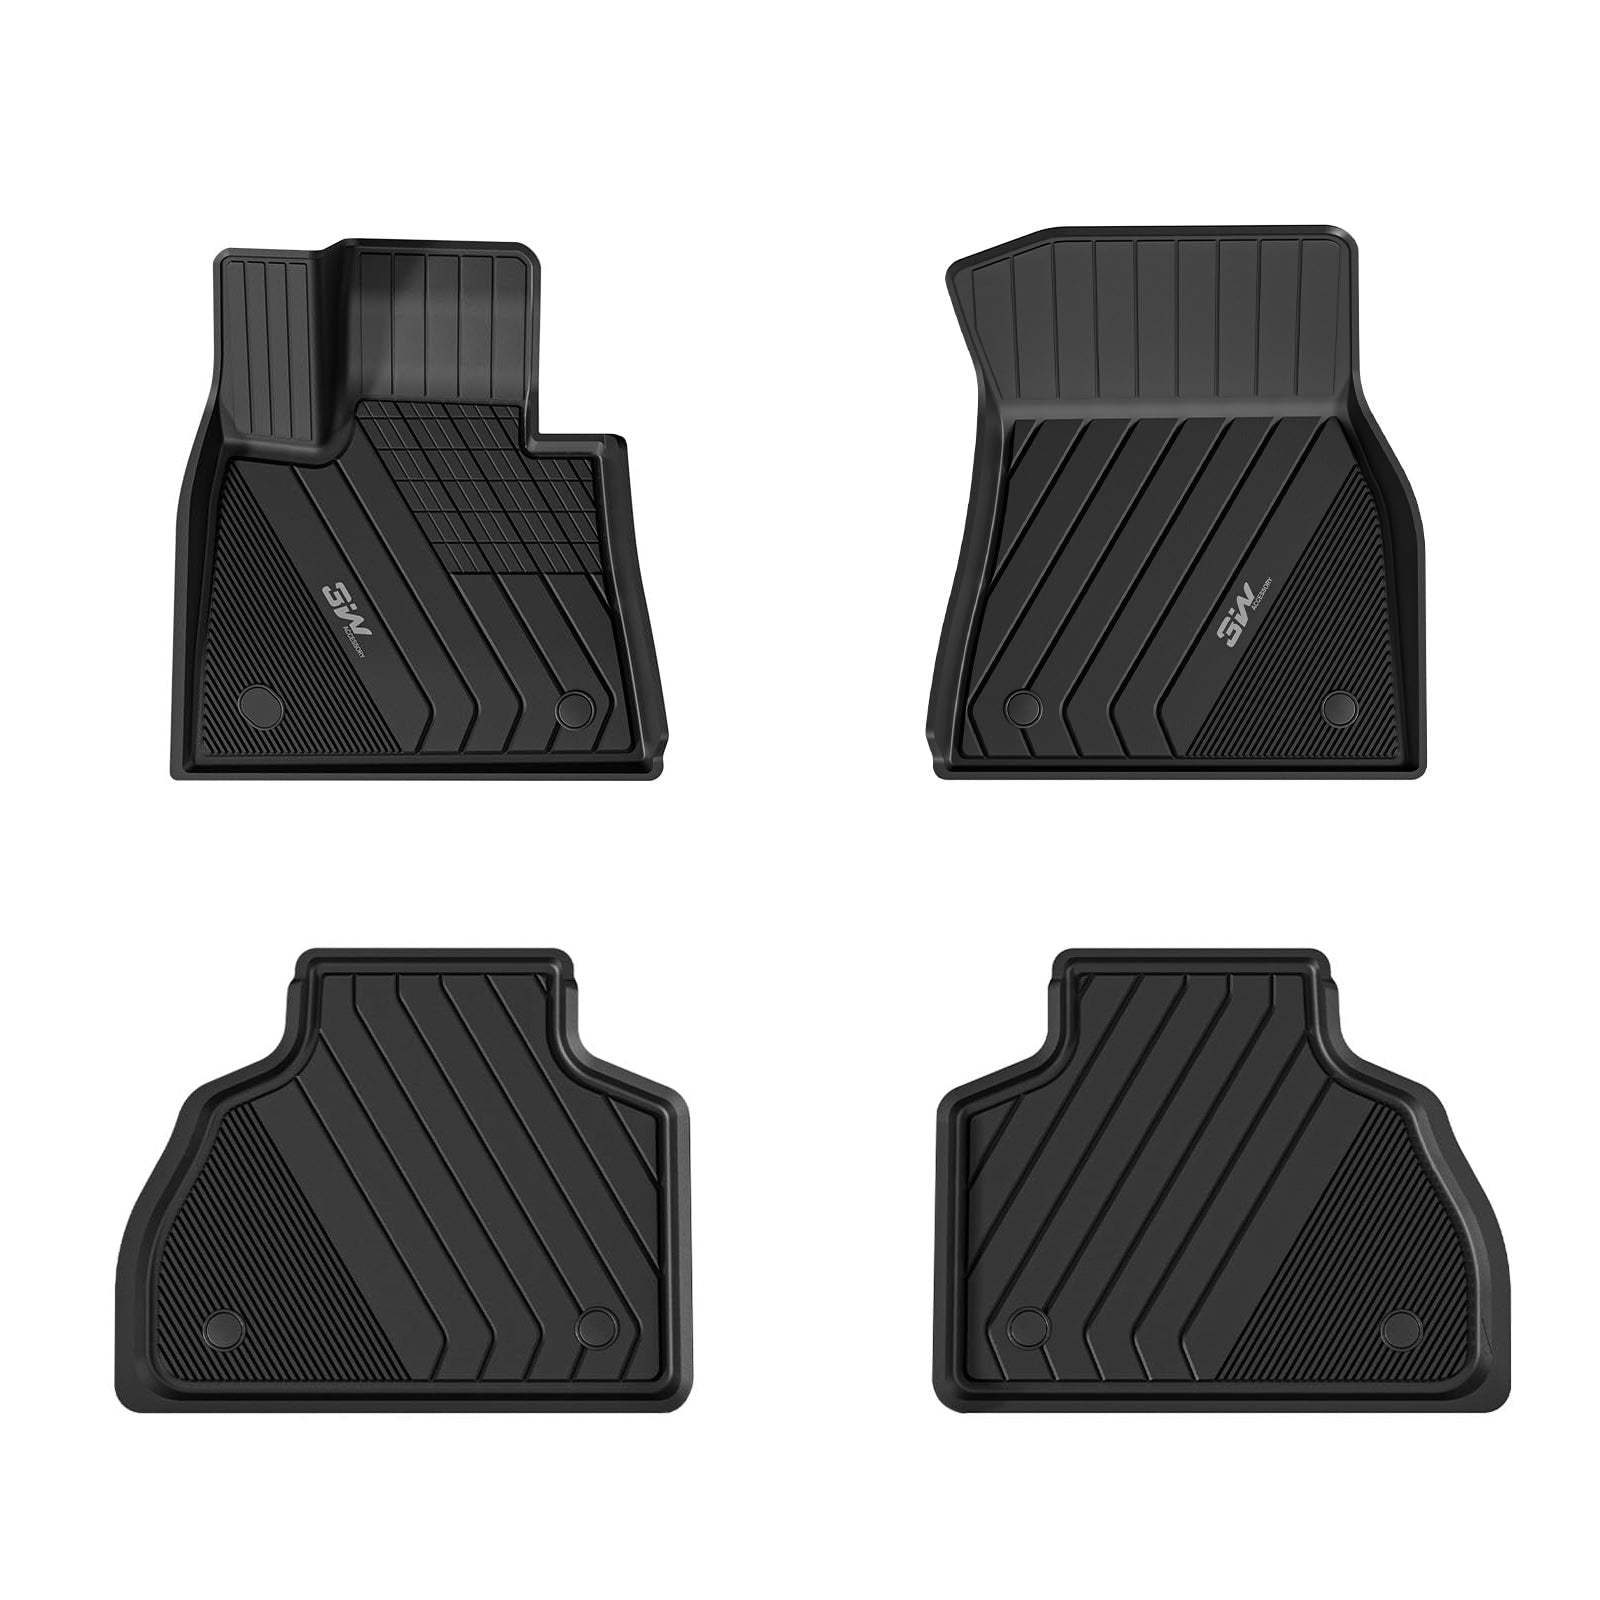 3W BMW X7 2020-2023 6 Seats 1st & 2nd Row Custom Floor Mats TPE Material & All-Weather Protection Vehicles & Parts 3Wliners 2020-2023 6-Seat X7 1st&2nd Row Mats